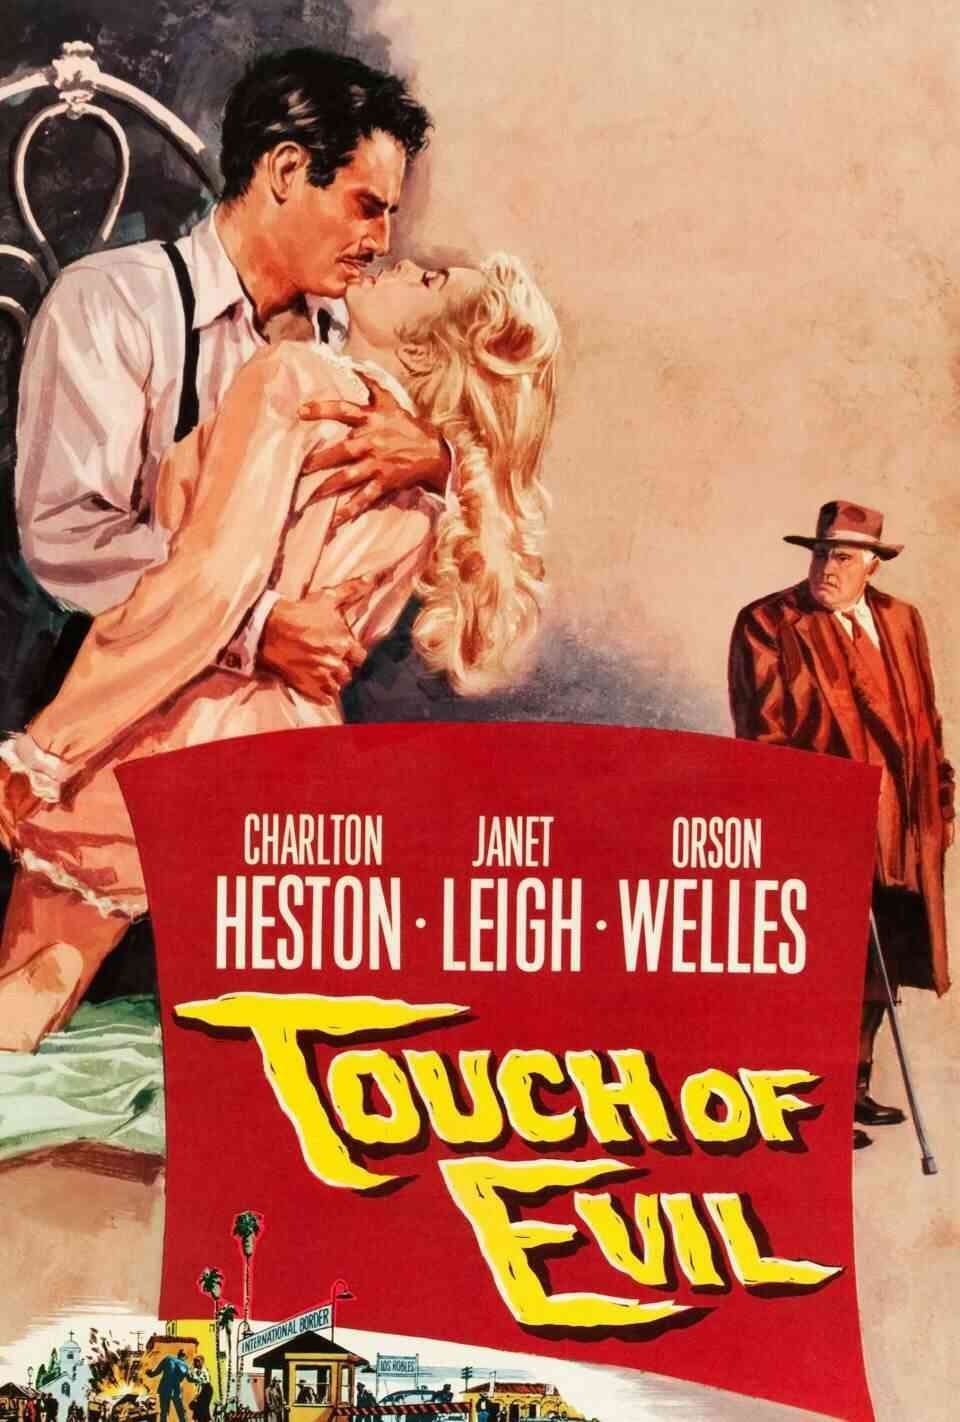 Read Touch of Evil screenplay.